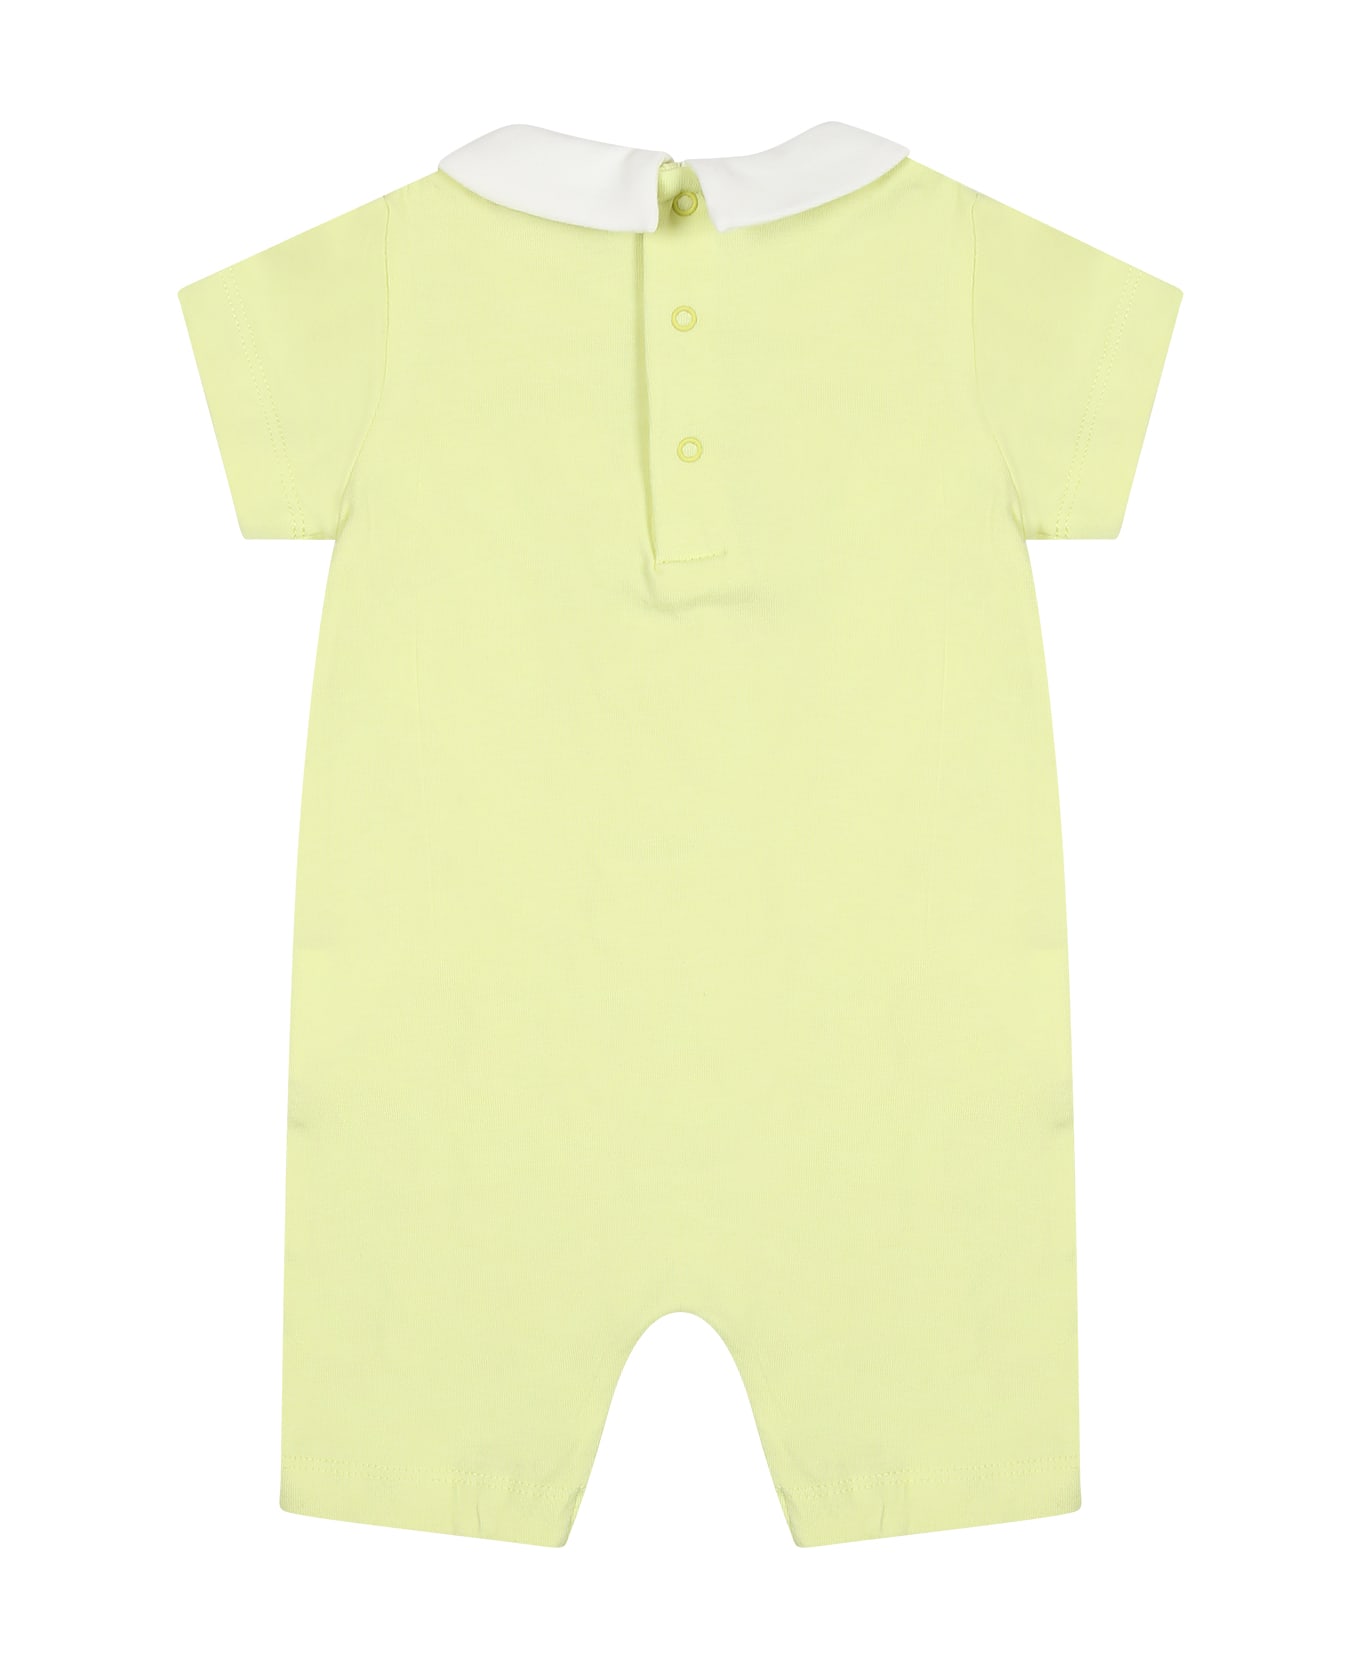 Moschino Green Bodysuit For Babies With Teddy Bear And Duck - Green ボディスーツ＆セットアップ